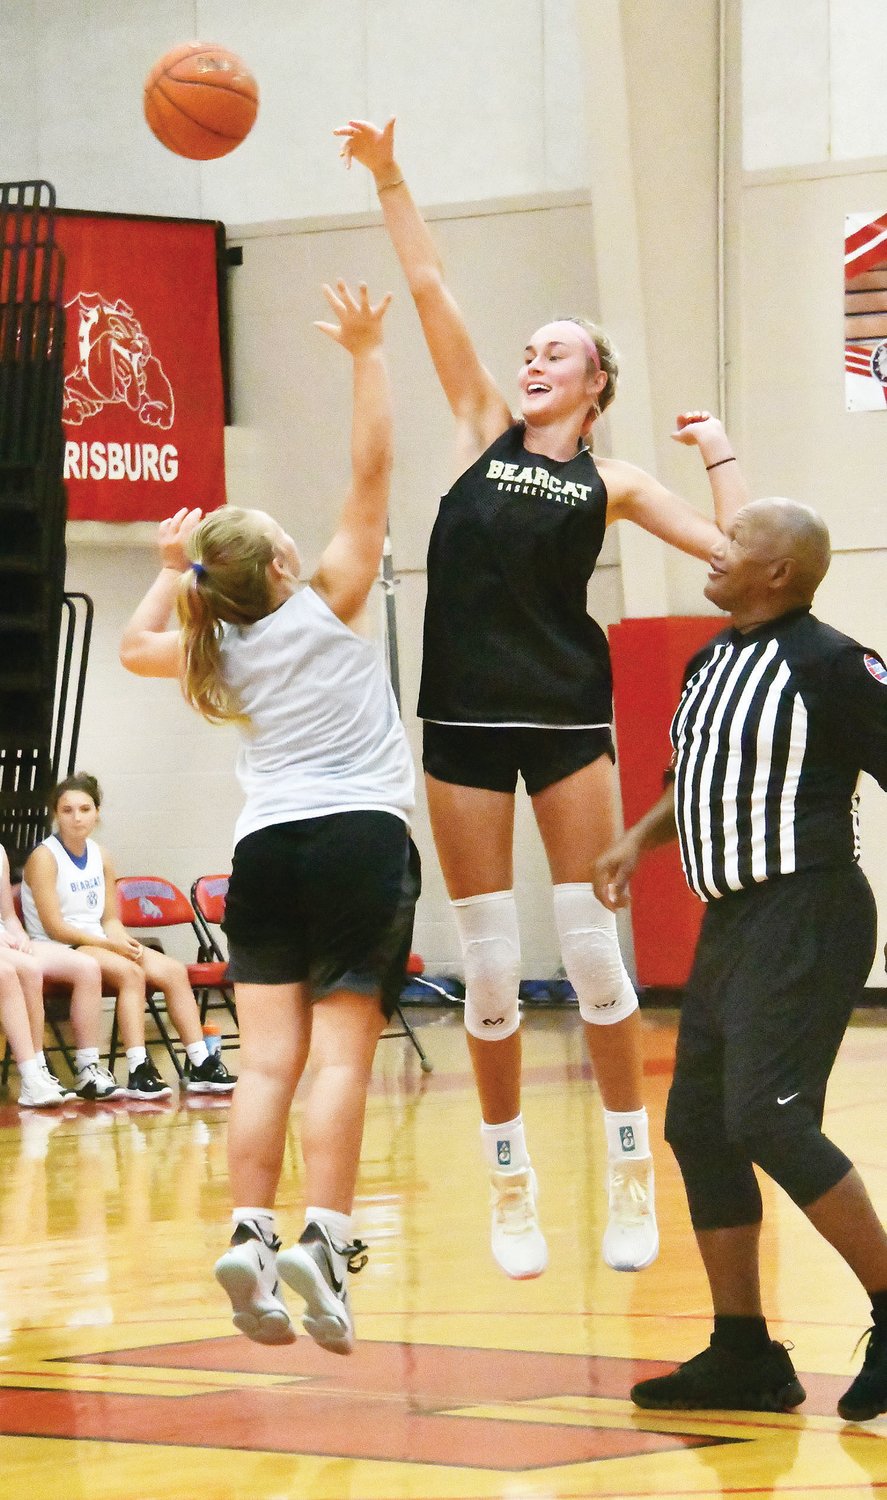 As expected, Cairo's Macie Harman wins the jump ball to open the "sudden victory" period.